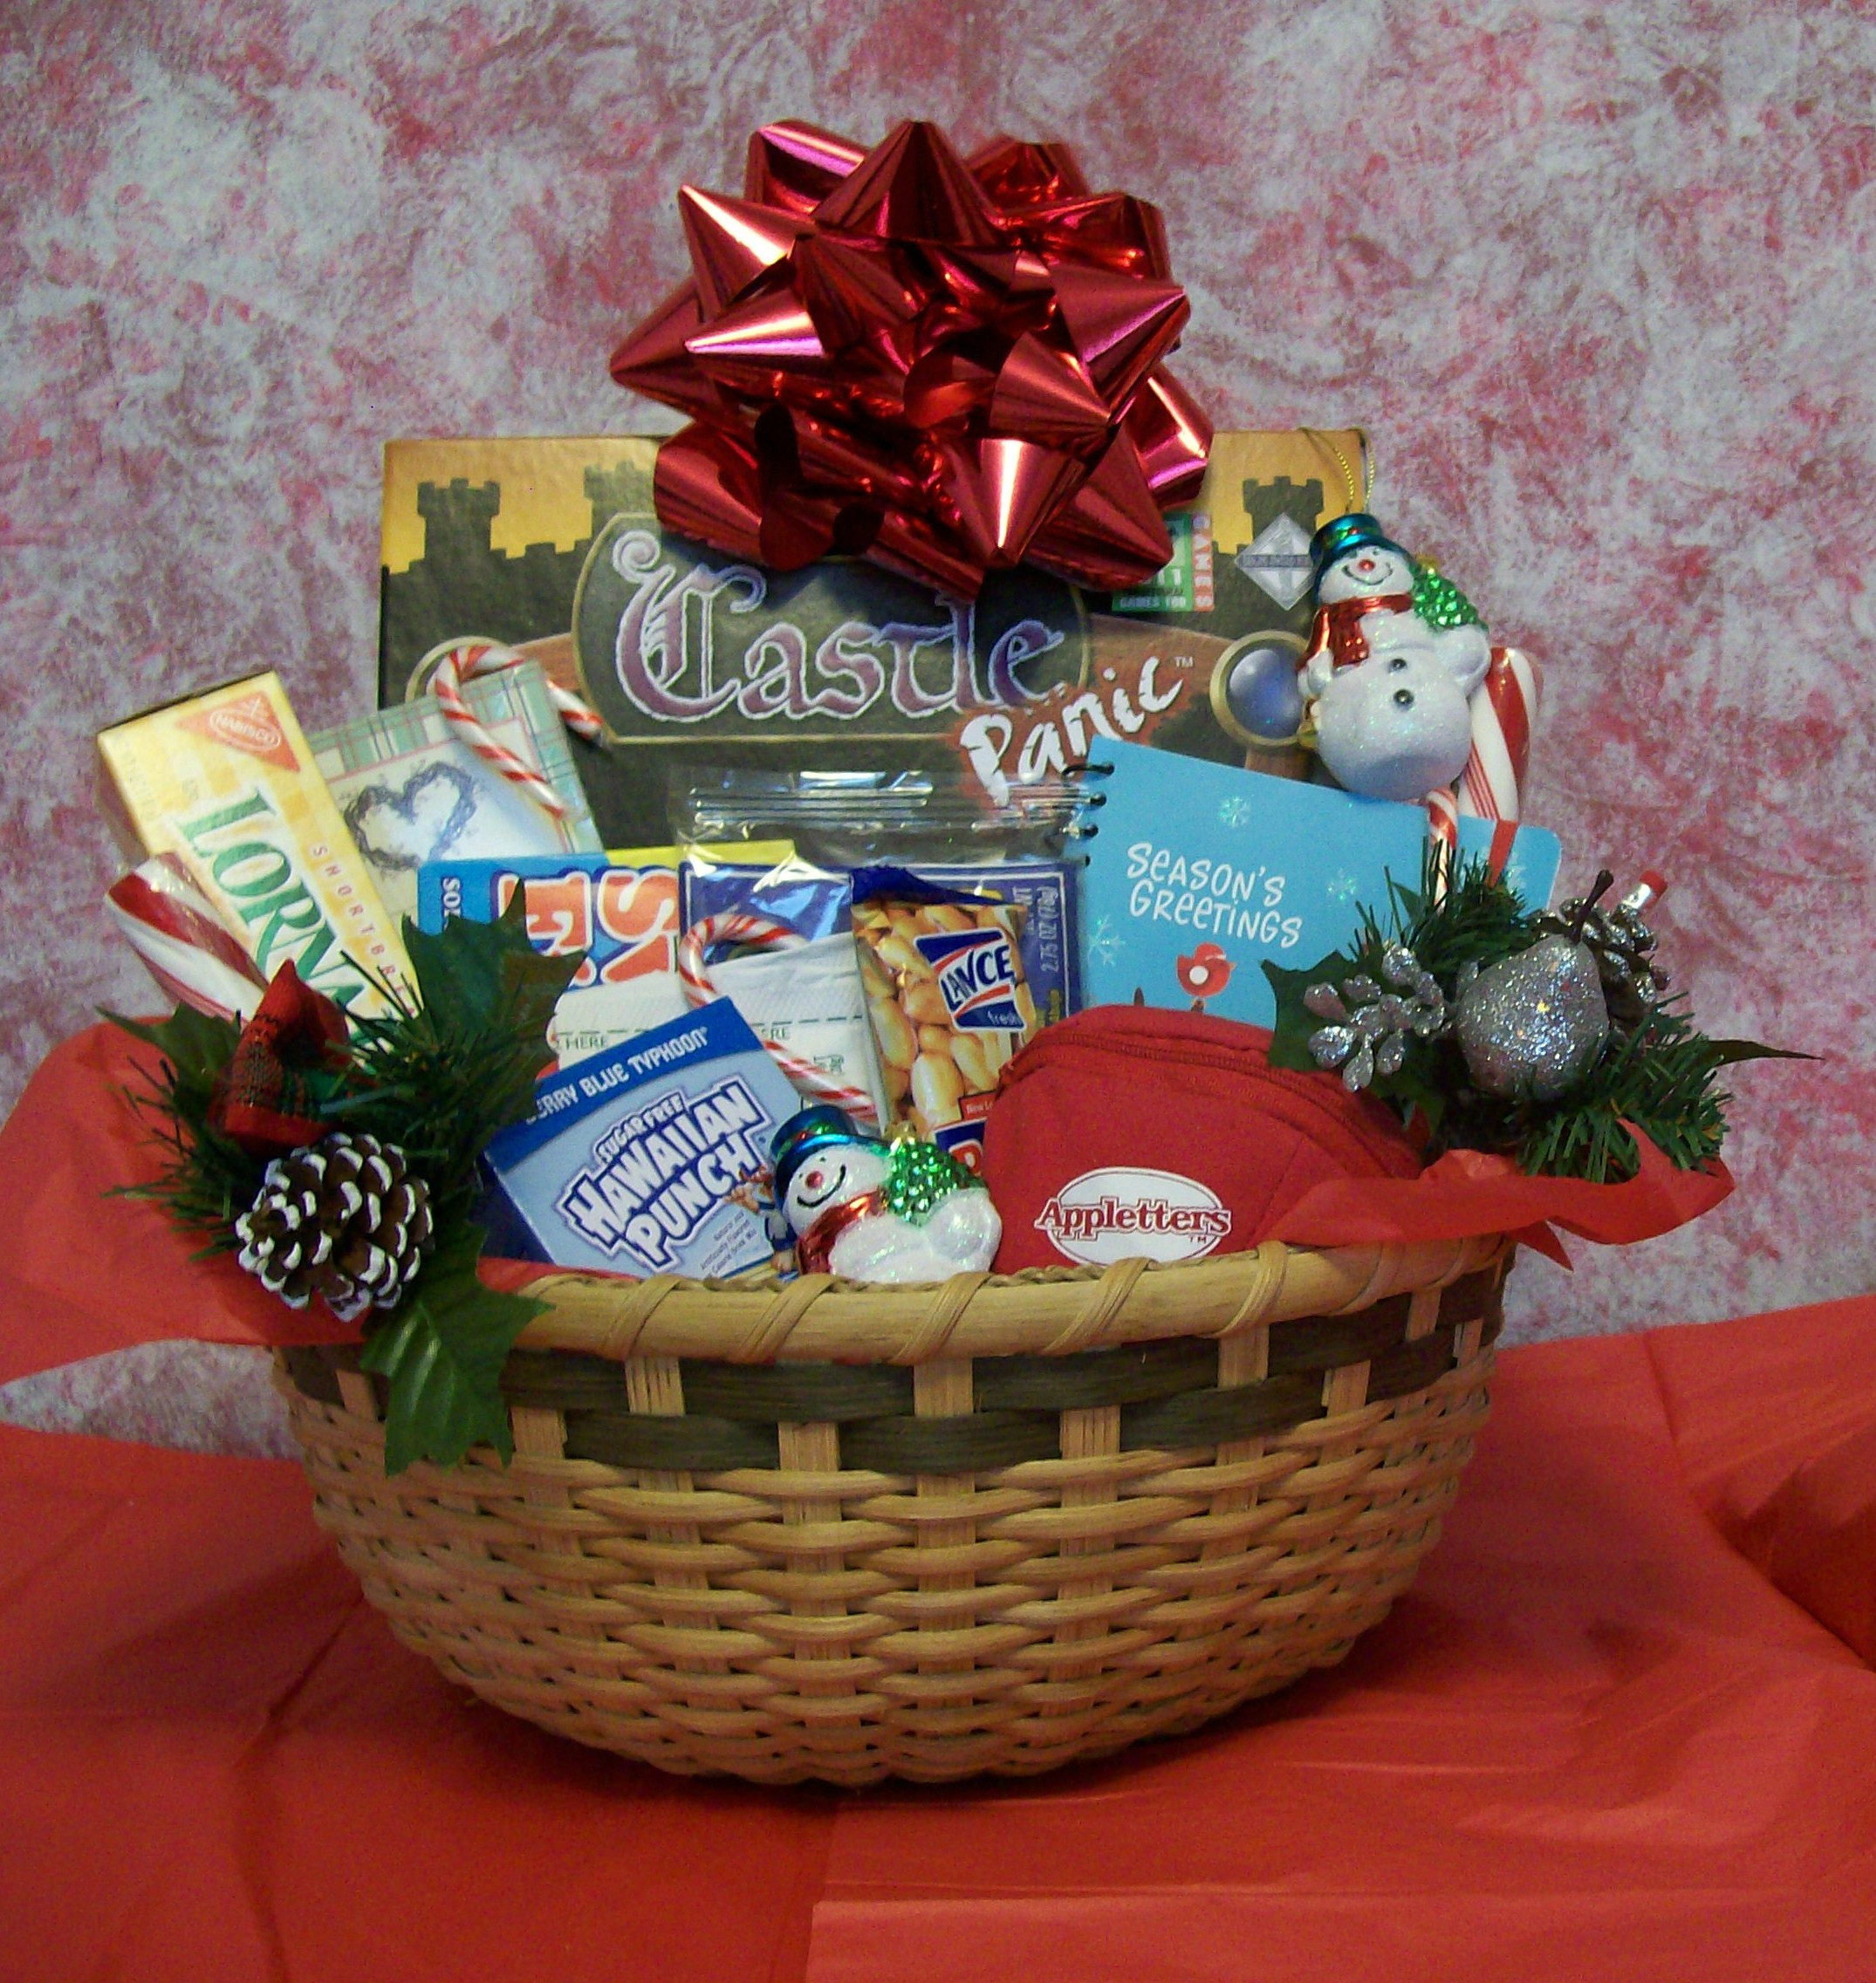 Christmas Gift Basket Ideas For Families
 Create a Christmas Fun and Games Gift Basket for a Family